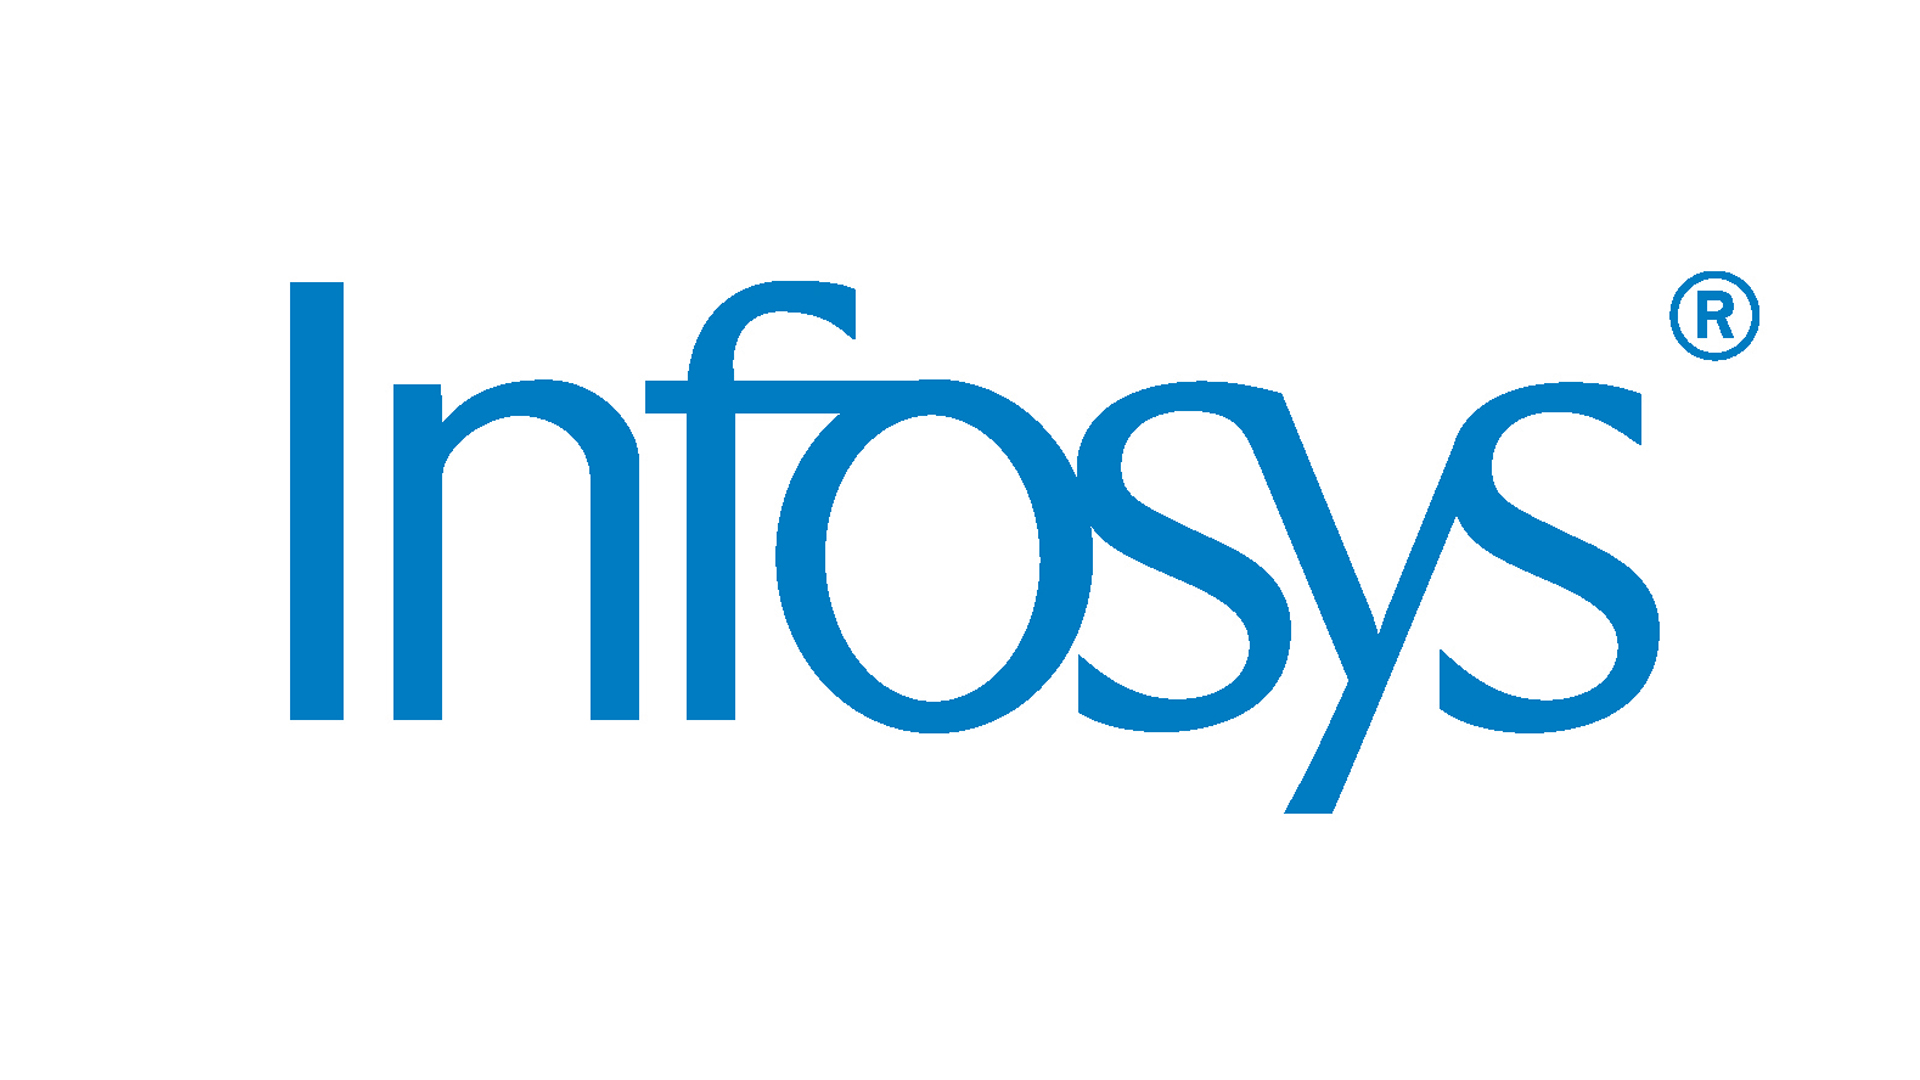 Infosys gets Rs 341 crore tax demand for assessment year 2020-21